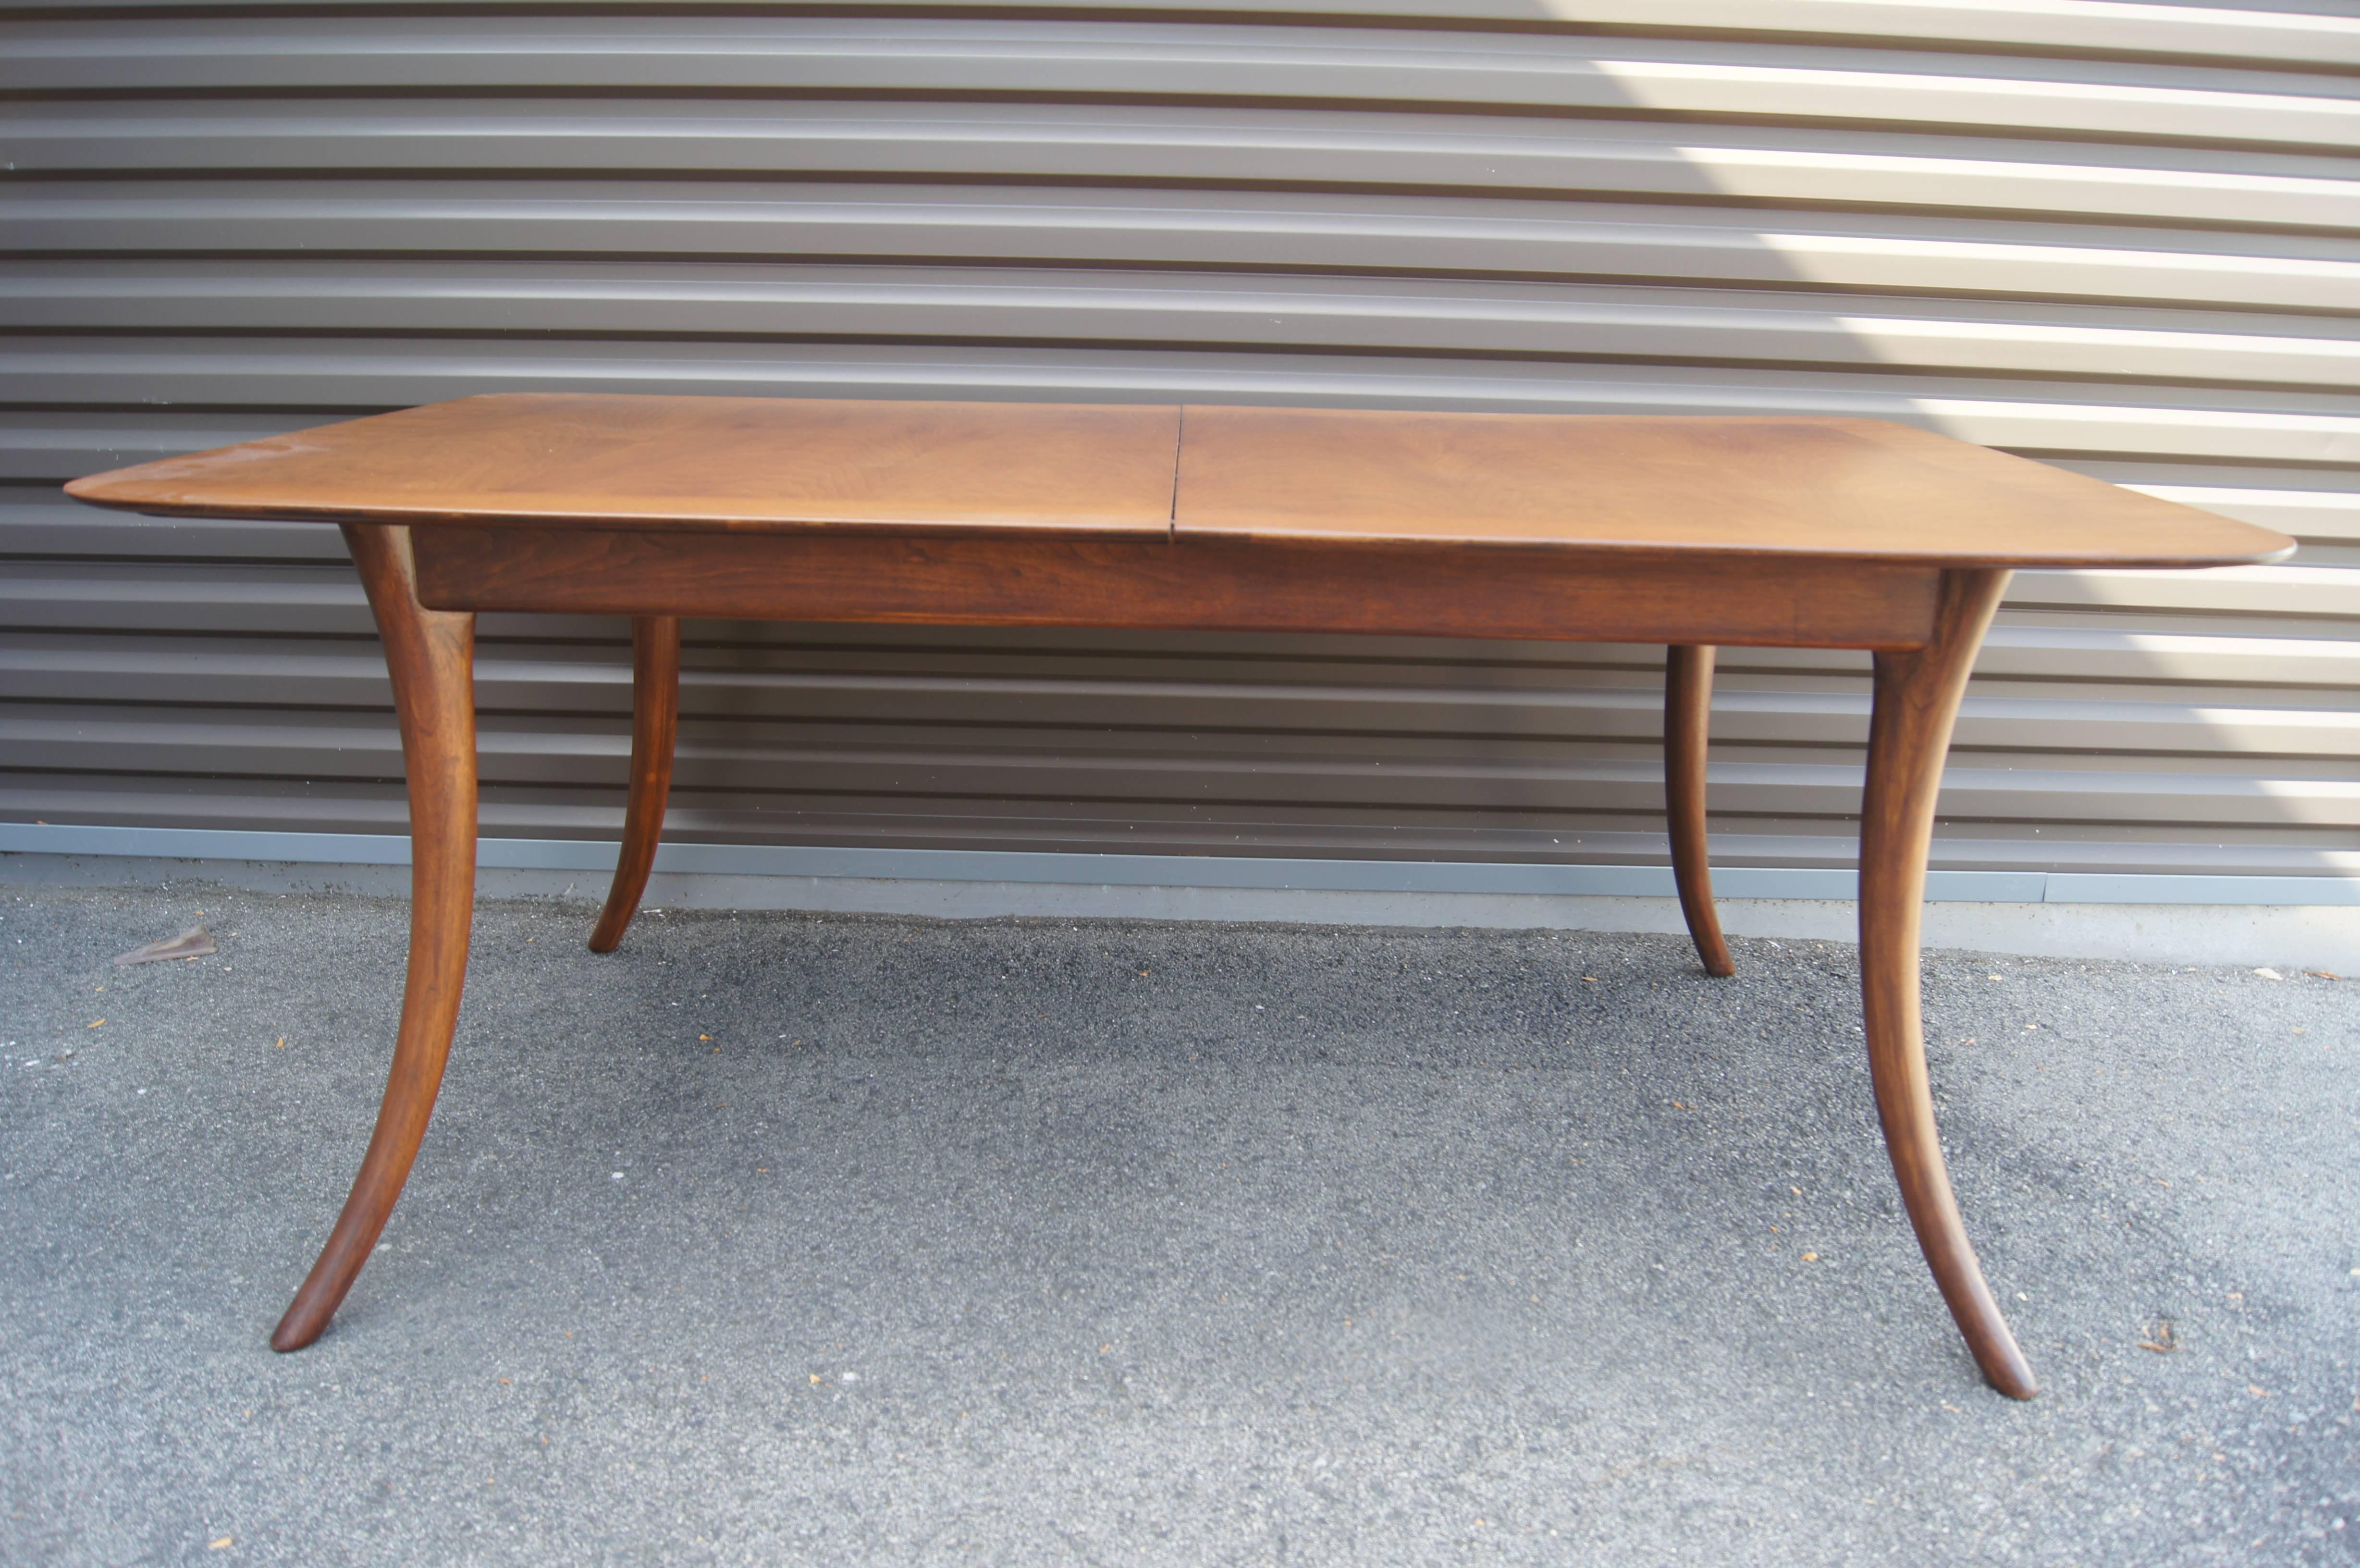 Designed by T.H. Robsjohn-Gibbings for Widdicomb, this large mahogany dining table features elegant saber legs. The table has two leaves, each measuring 18